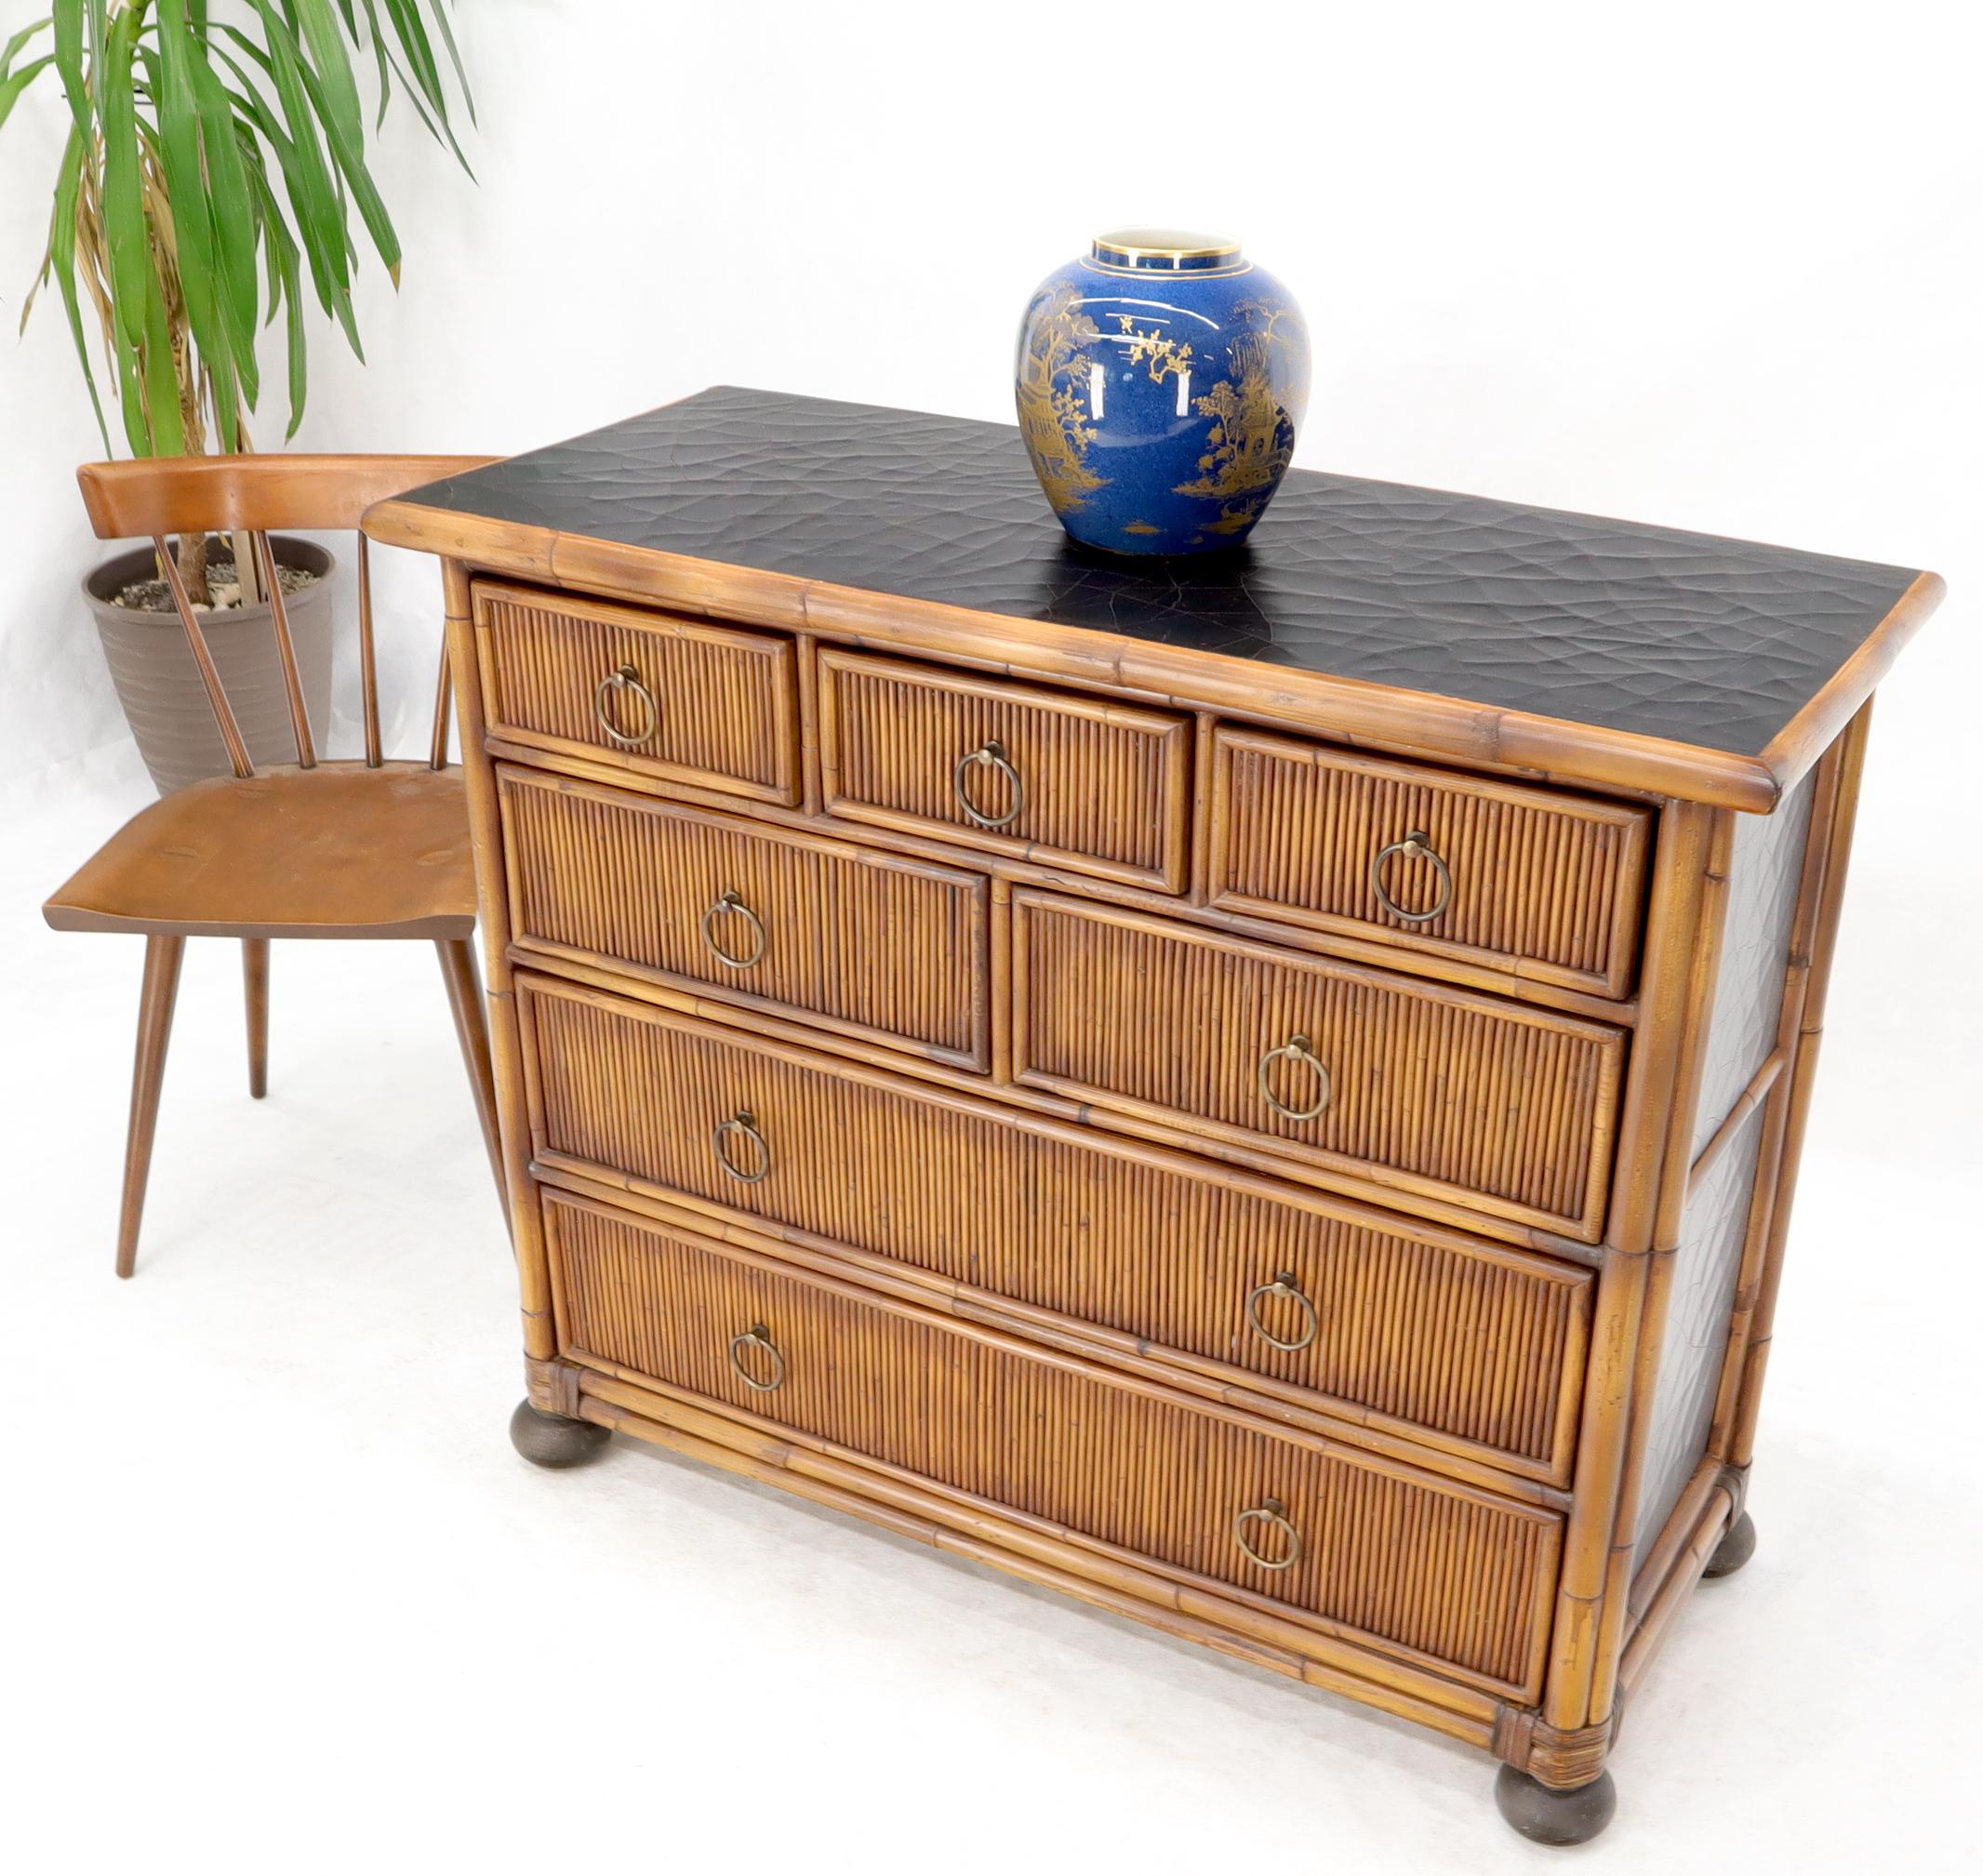 Rattan 7 Drawer Bachelor Chest of Drawers by Baker In Good Condition For Sale In Rockaway, NJ